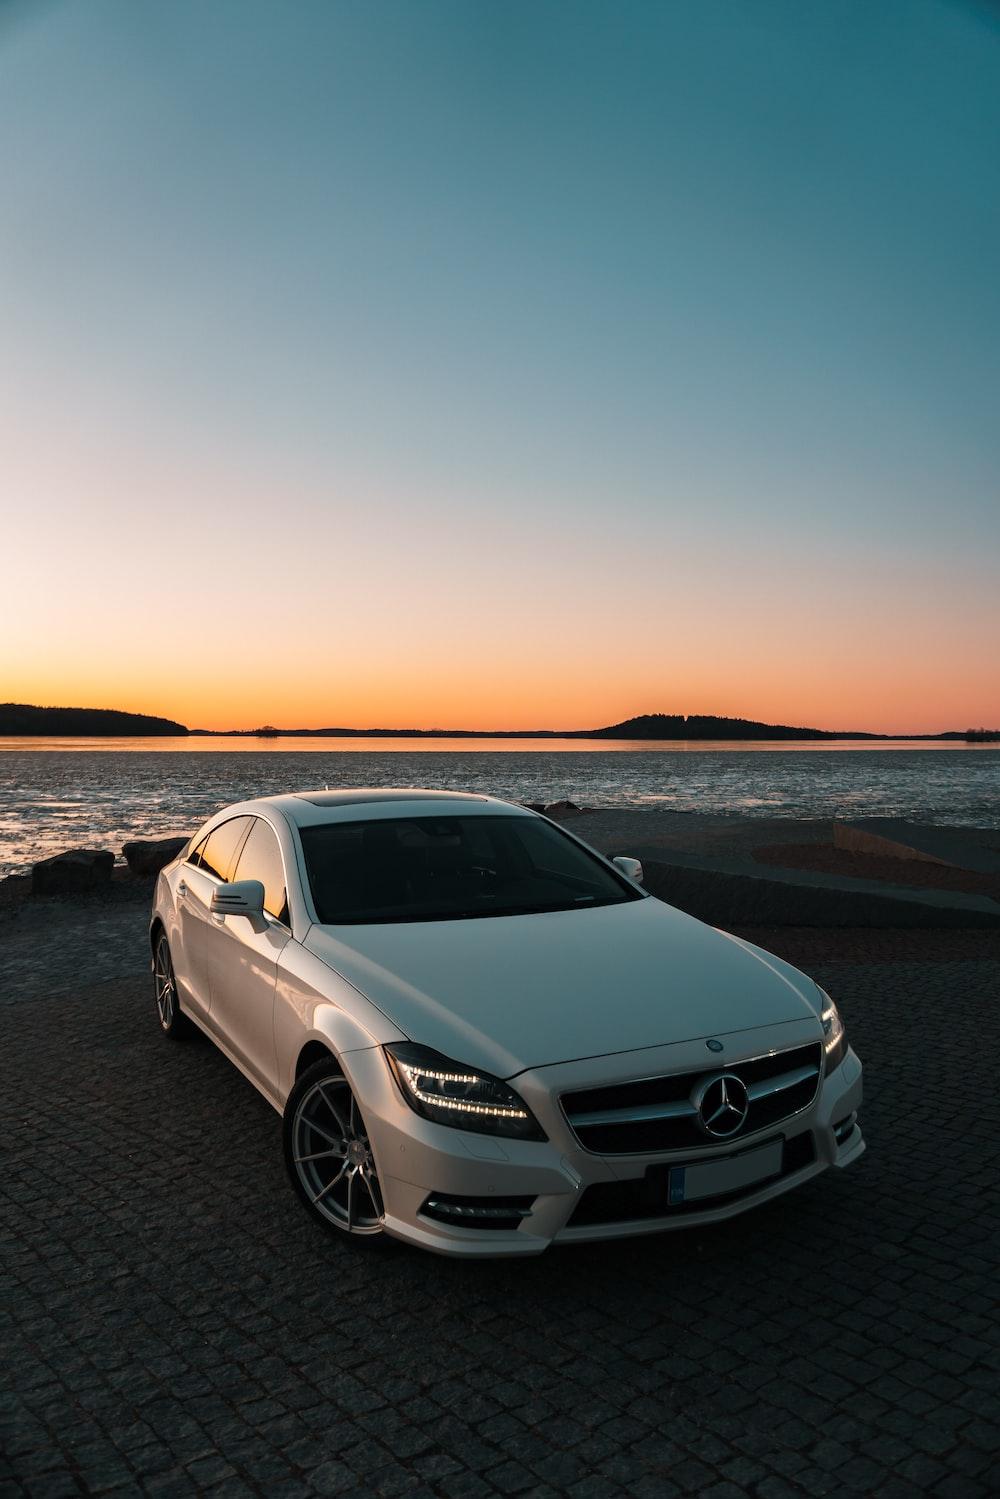 White Mercedes Benz C Class On Beach During Sunset Photo